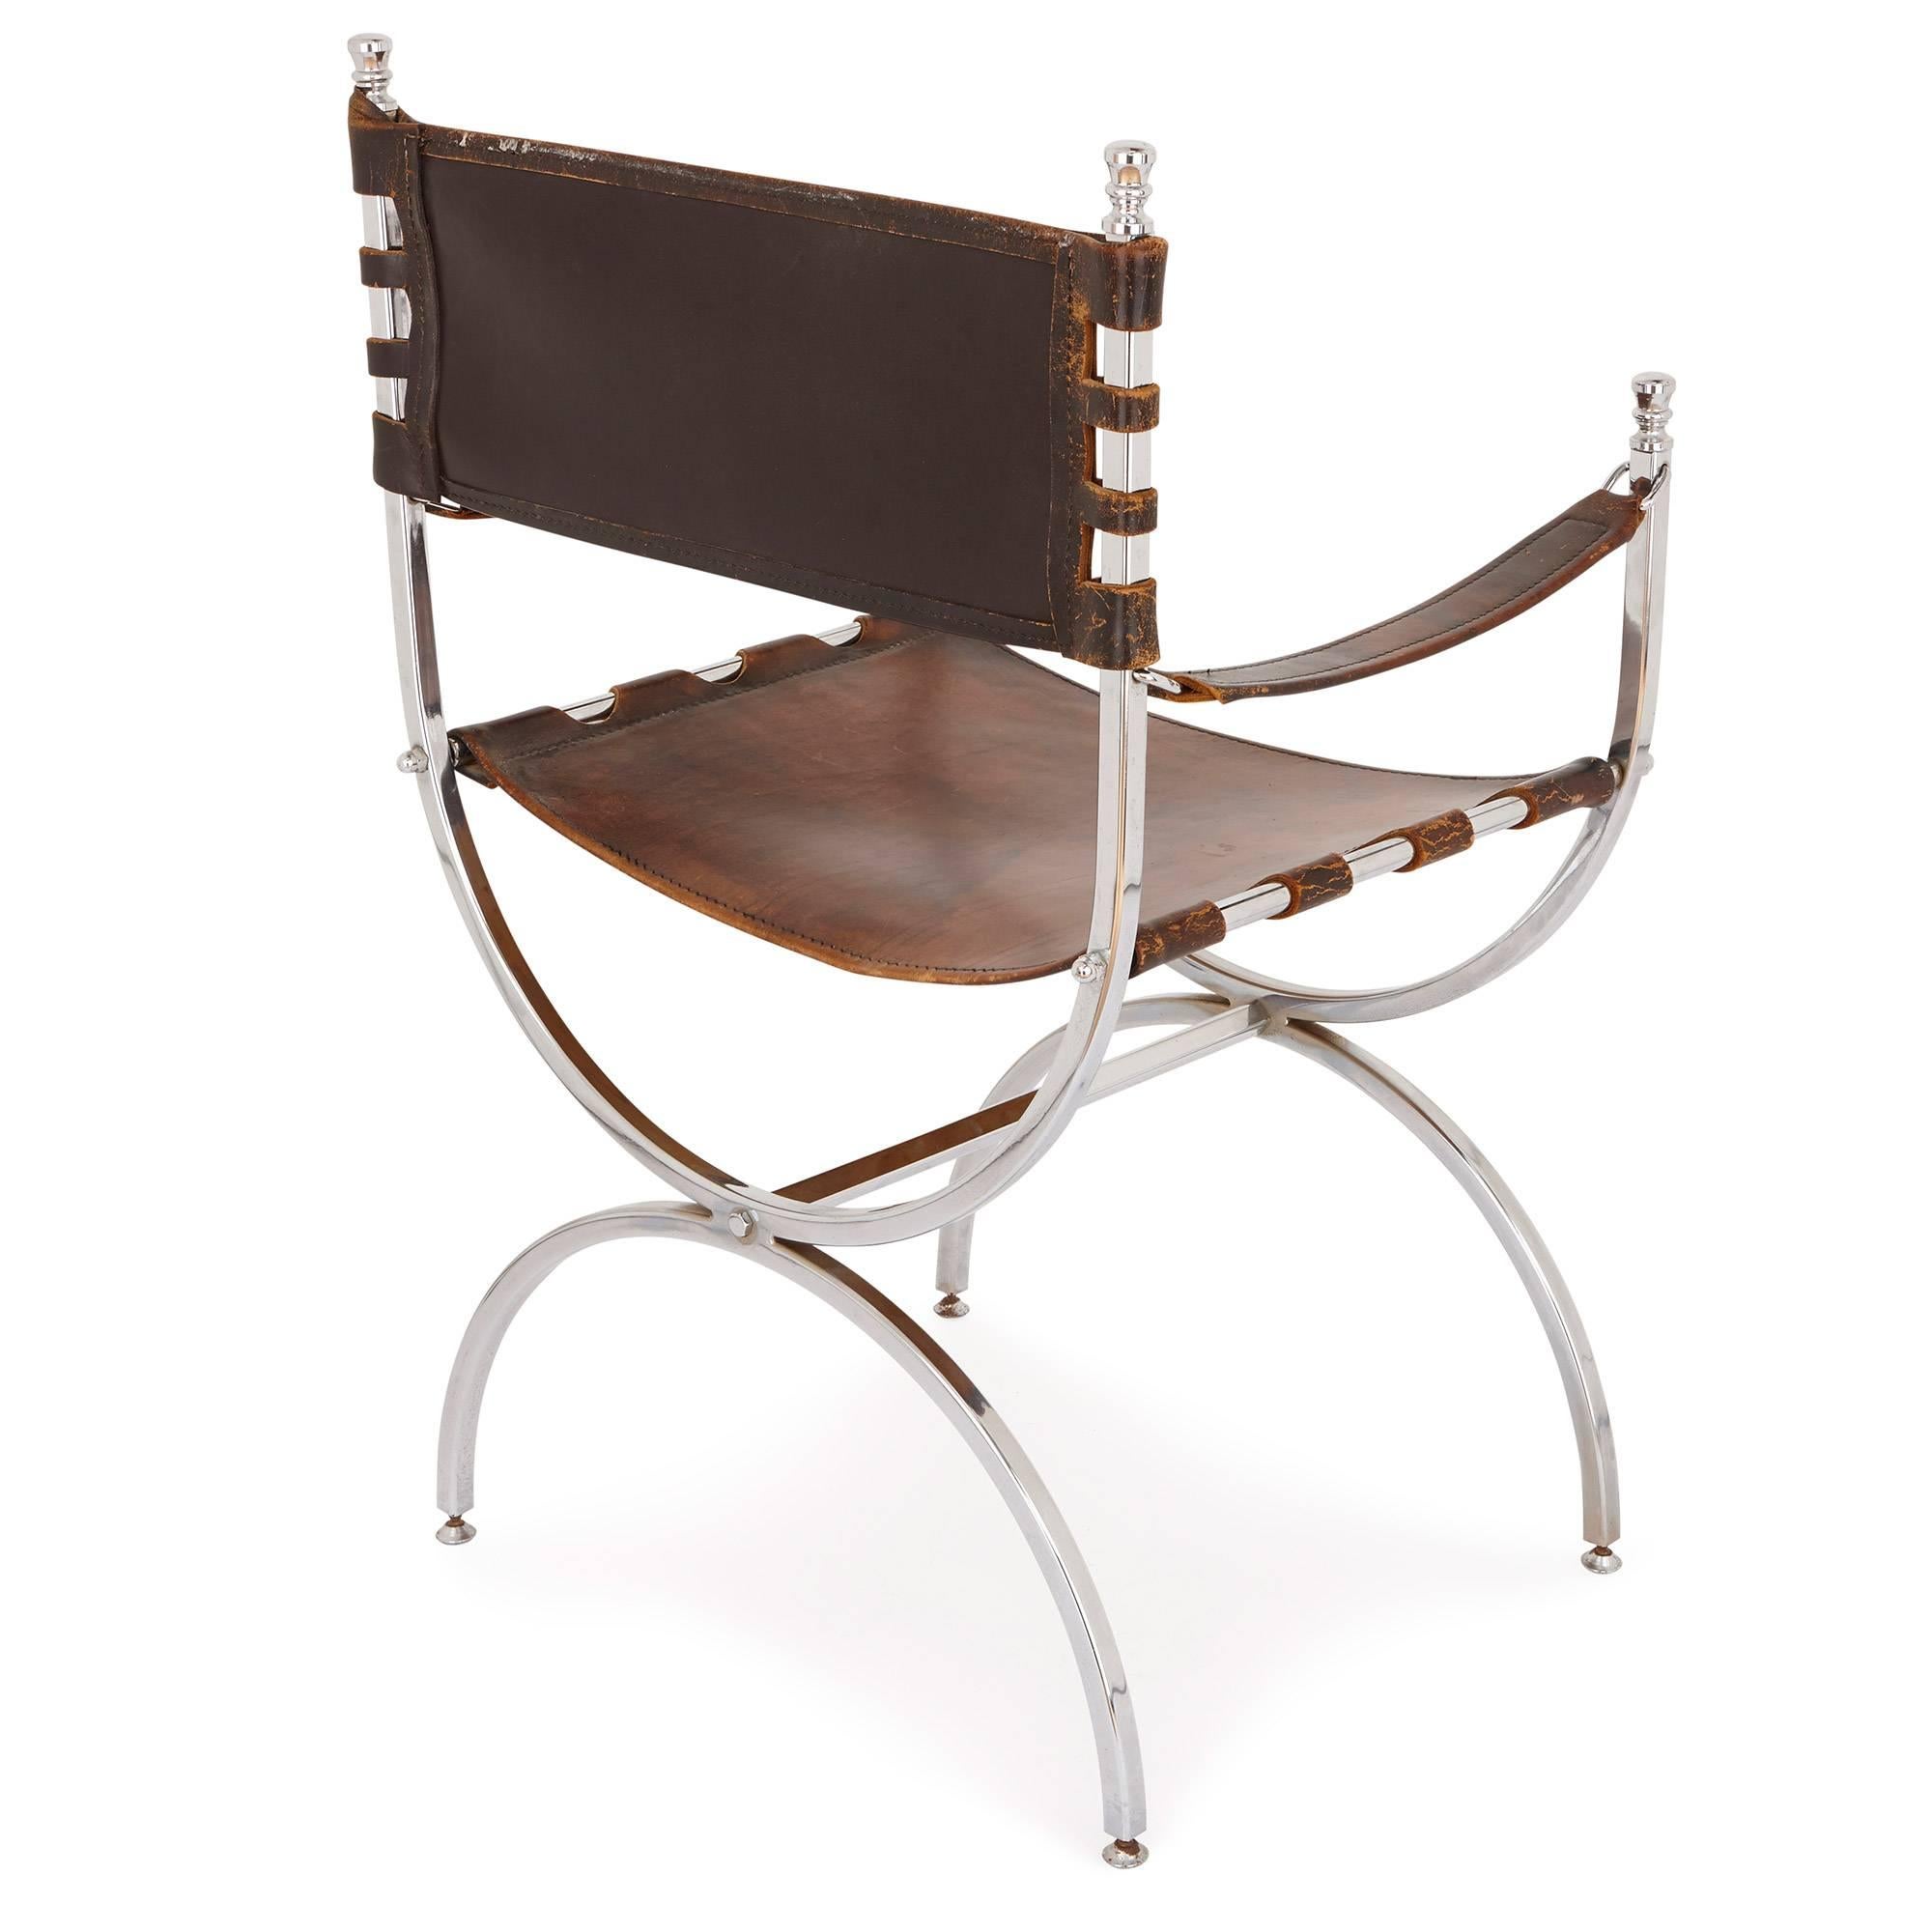 These two chairs are designed and executed with the sleek, minimal design of French modernism. They are crafted with chic, curving silvered metal which takes an X-form. Between the silvered frame are stretched brown leather sheets, forming supple